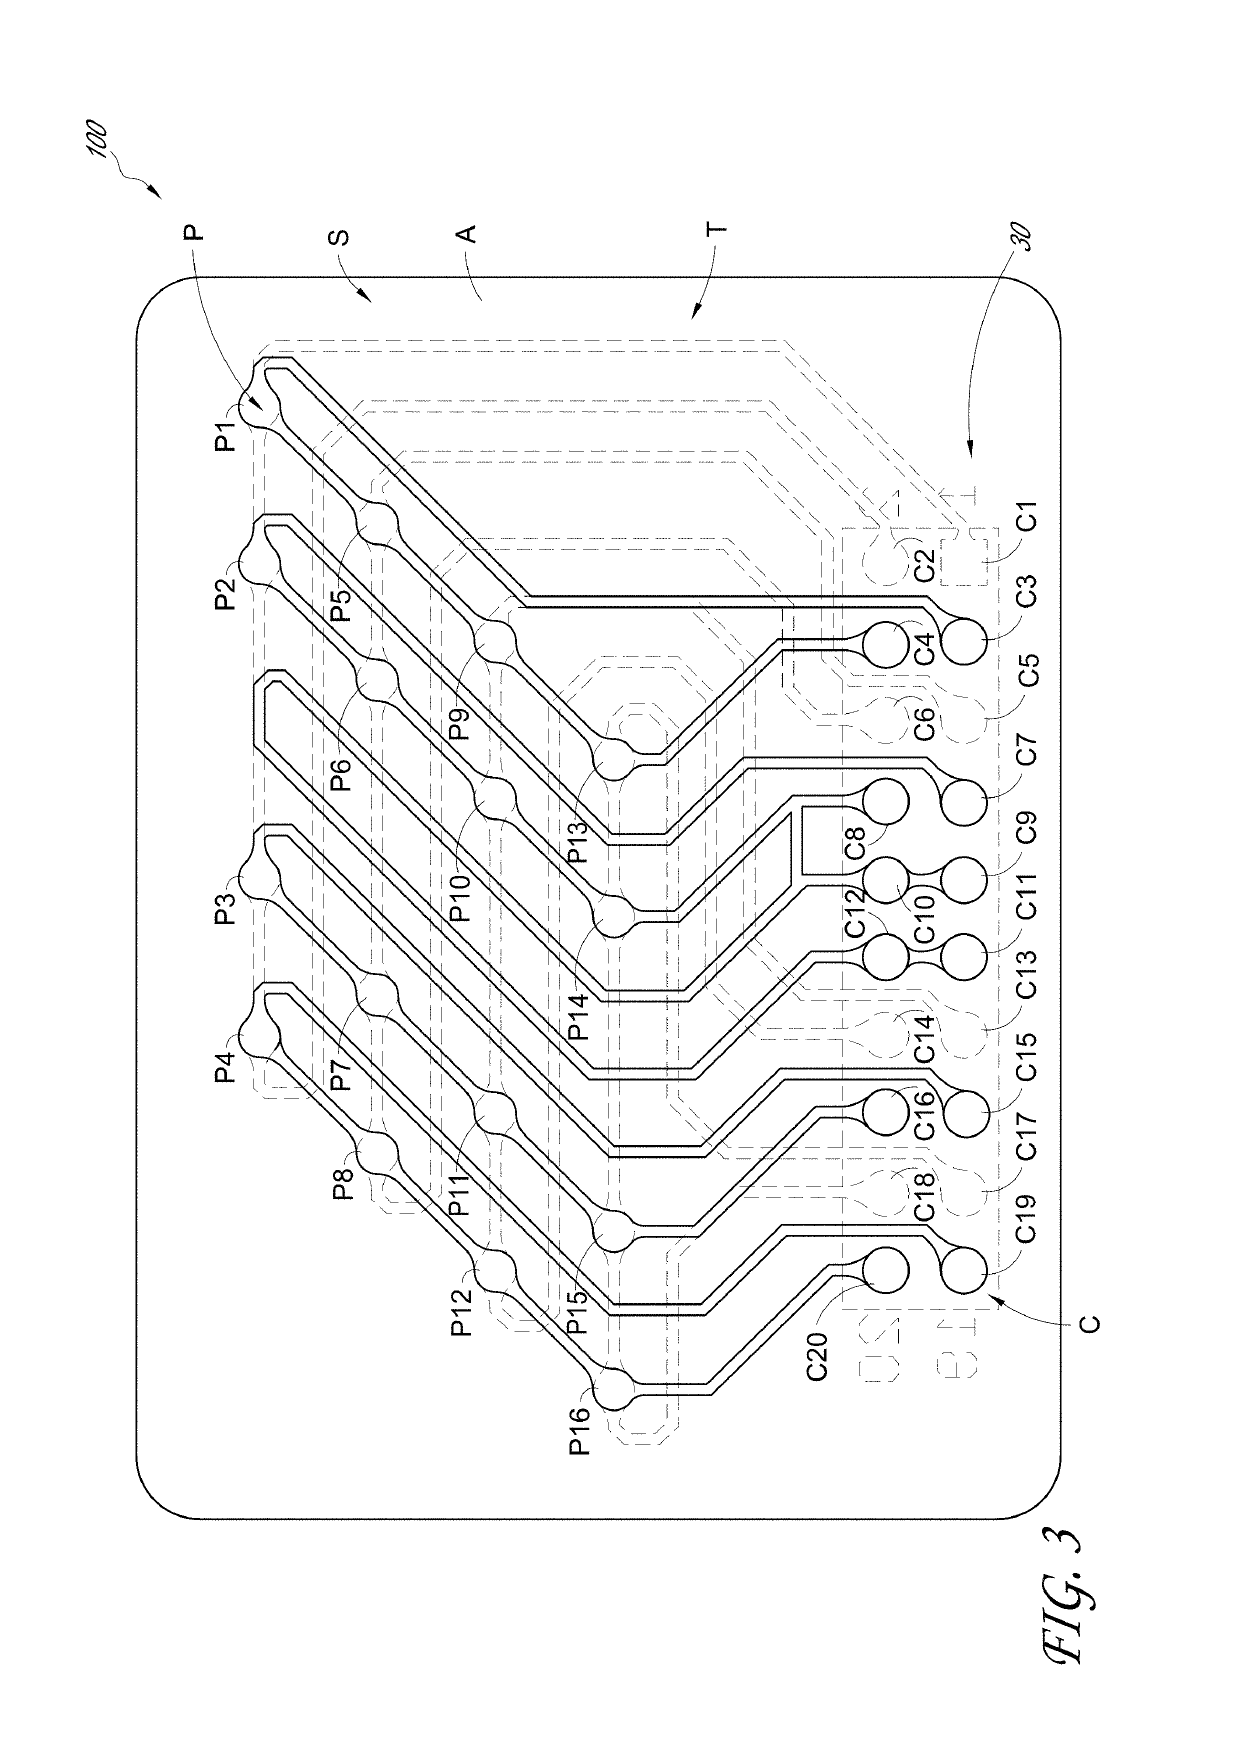 Printed circuit board test coupon for electrical testing during thermal exposure and method of using the same